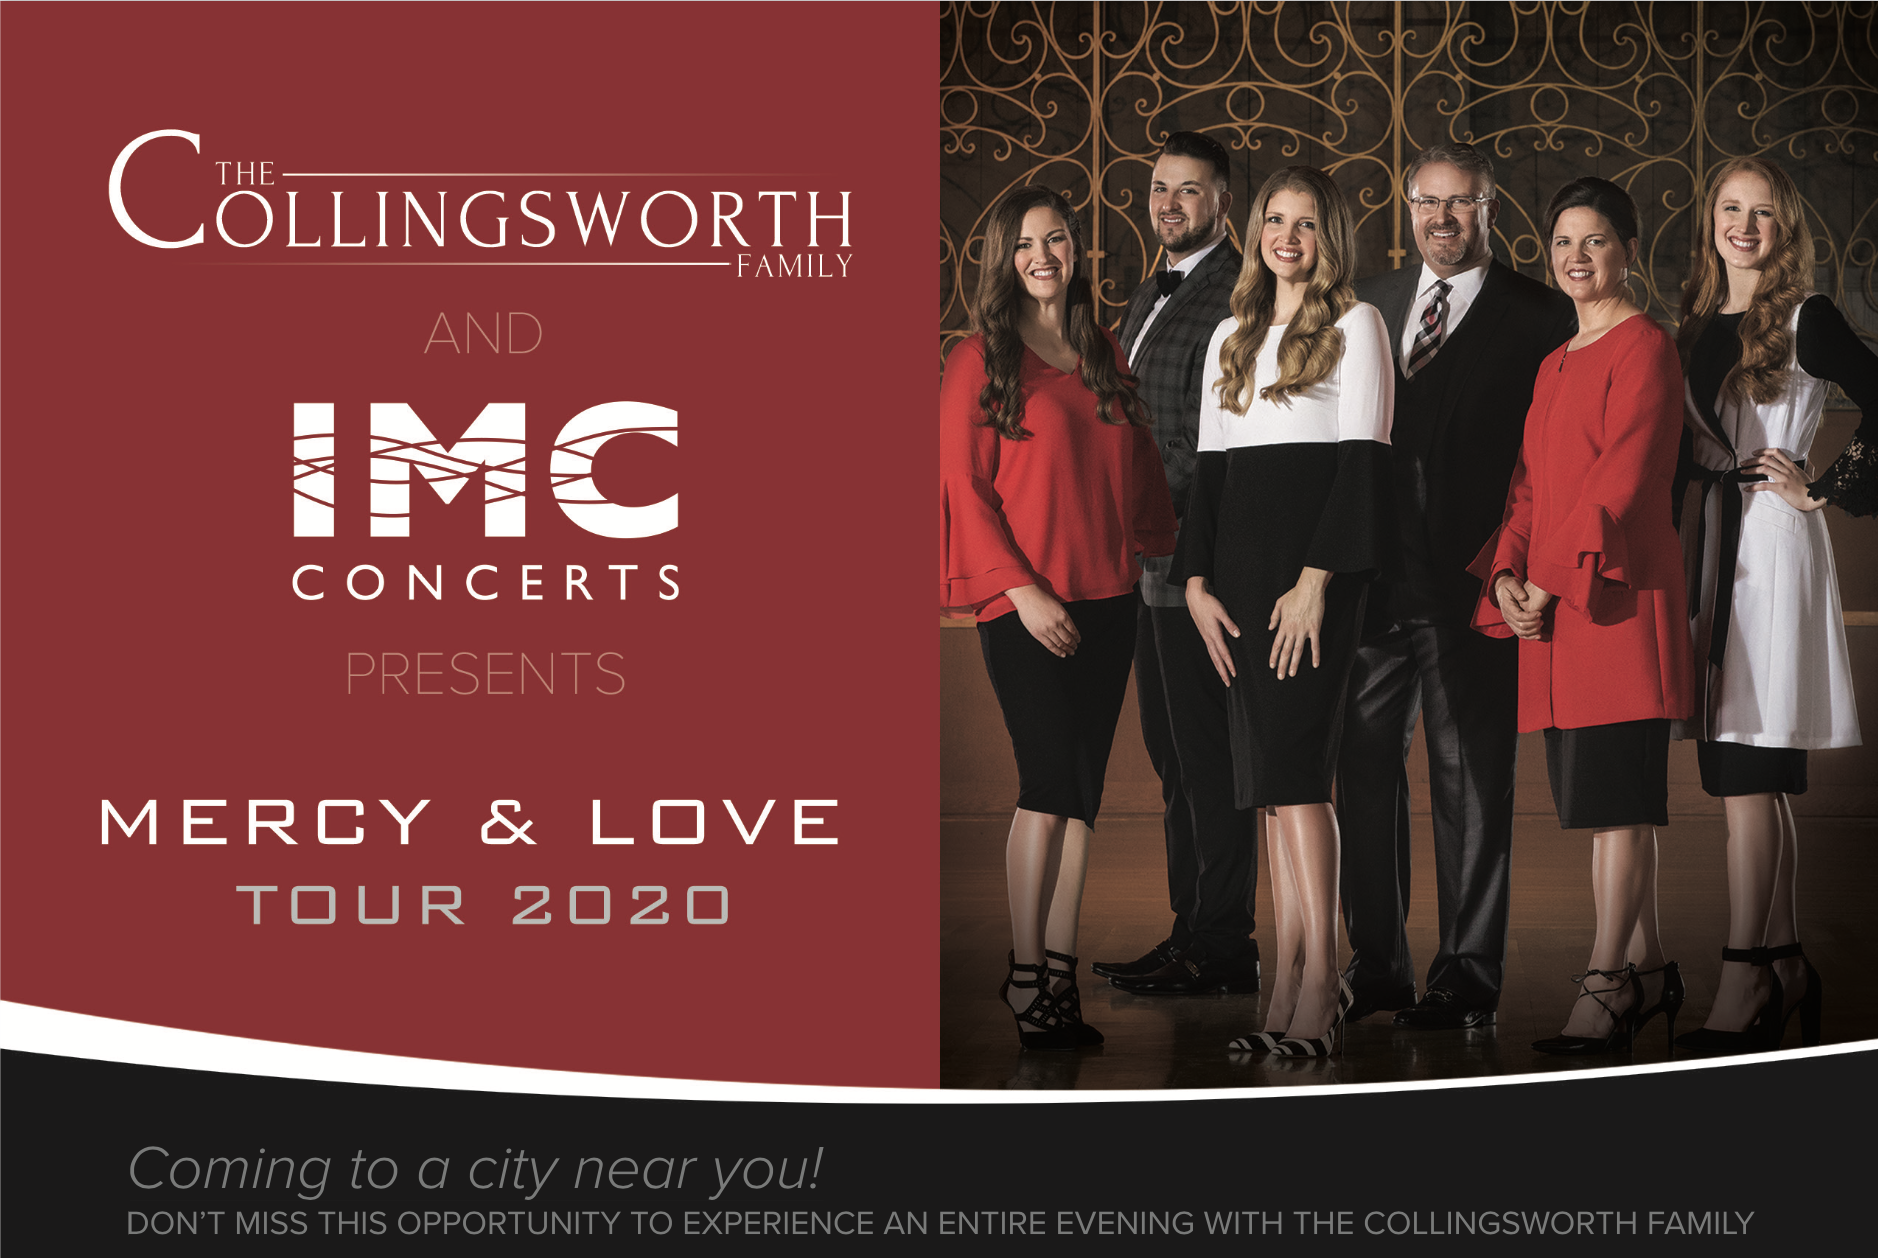 IMC CONCERTS TEAMS WITH THE COLLINGSWORTH FAMILY TO PRESENT MERCY